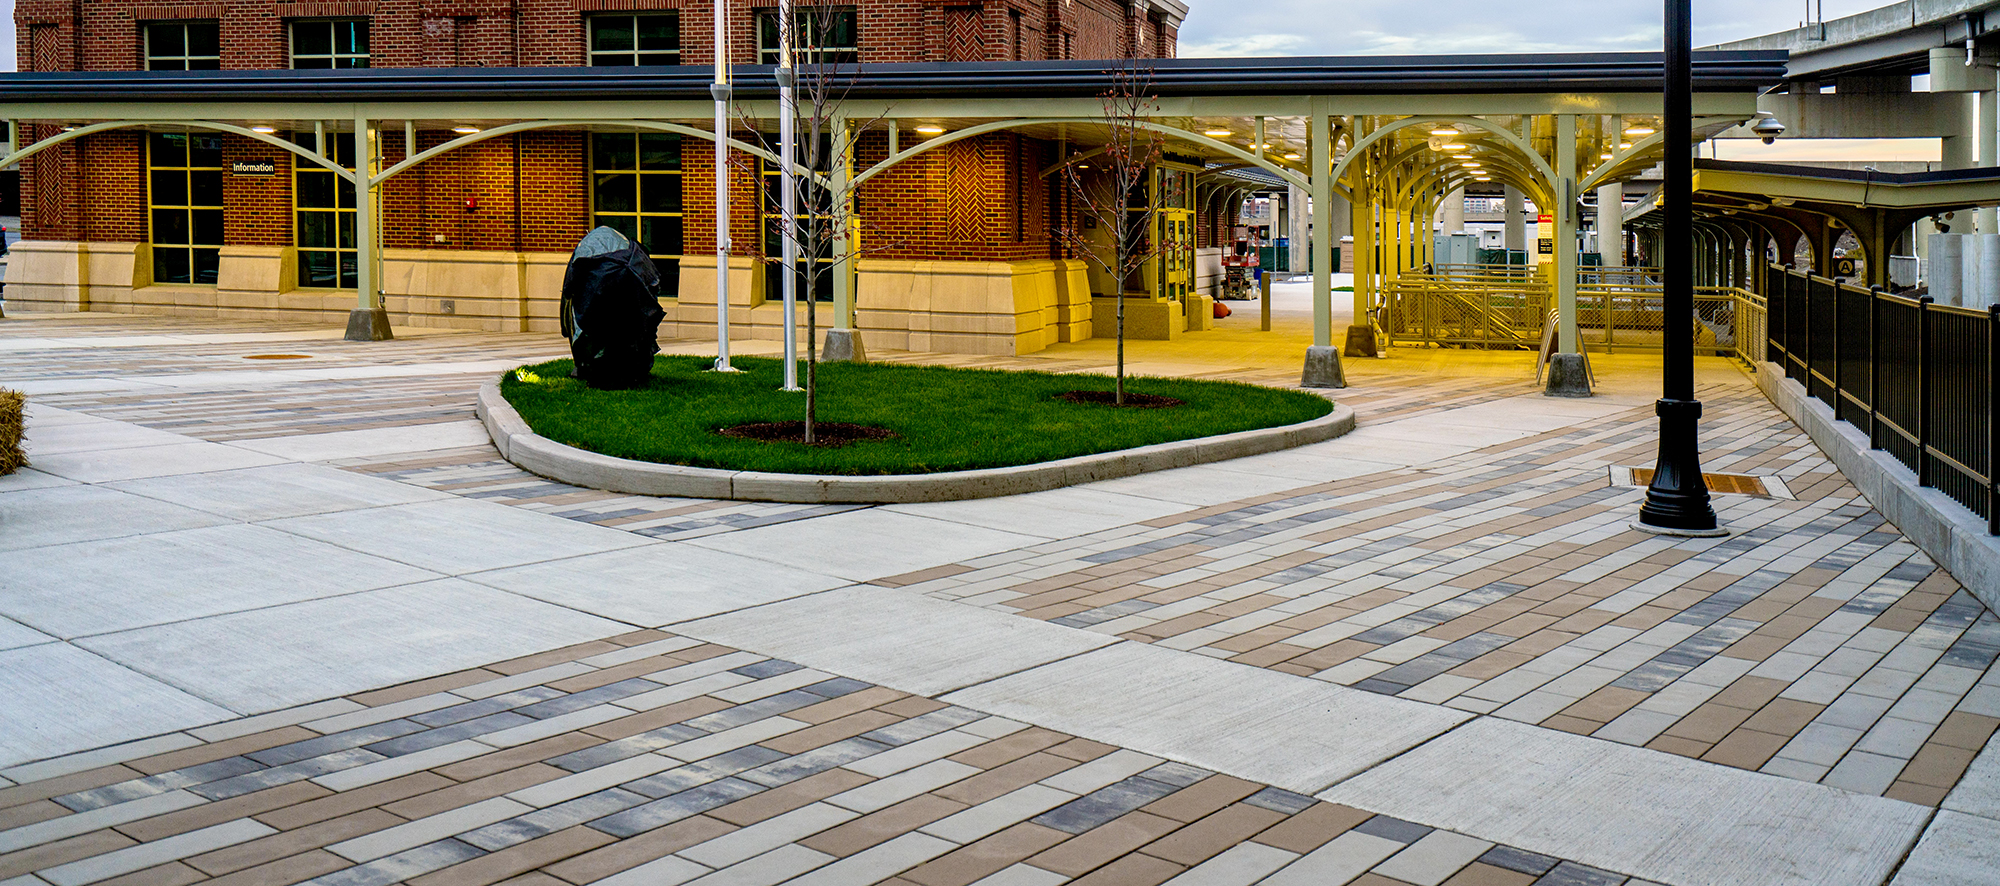 In front of a train station is a plaza in tri-color Promenade Plank pavers with concrete sidewalks and a small landscaped area.